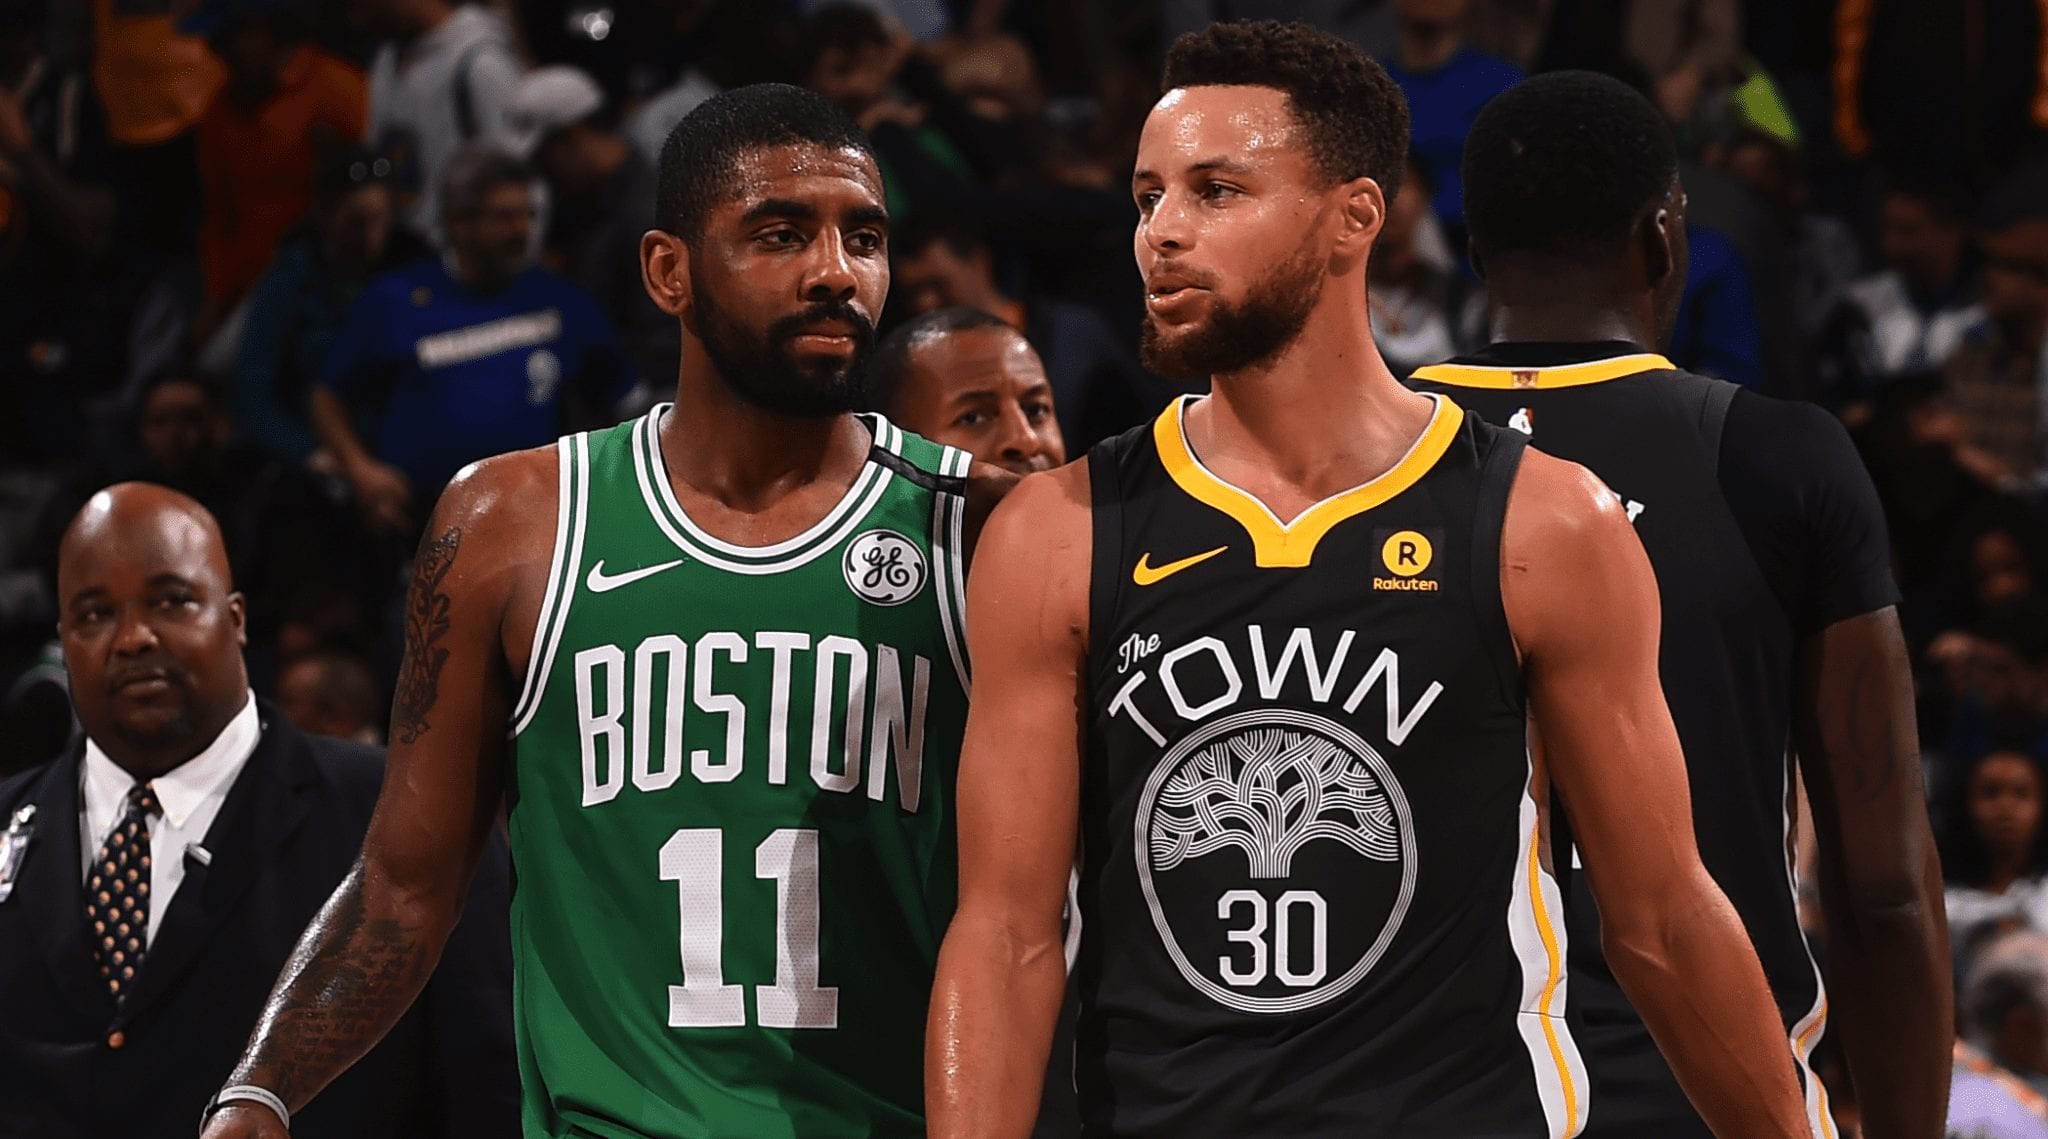 Stephen Curry on Kyrie Irving: We bring 'best out of each other